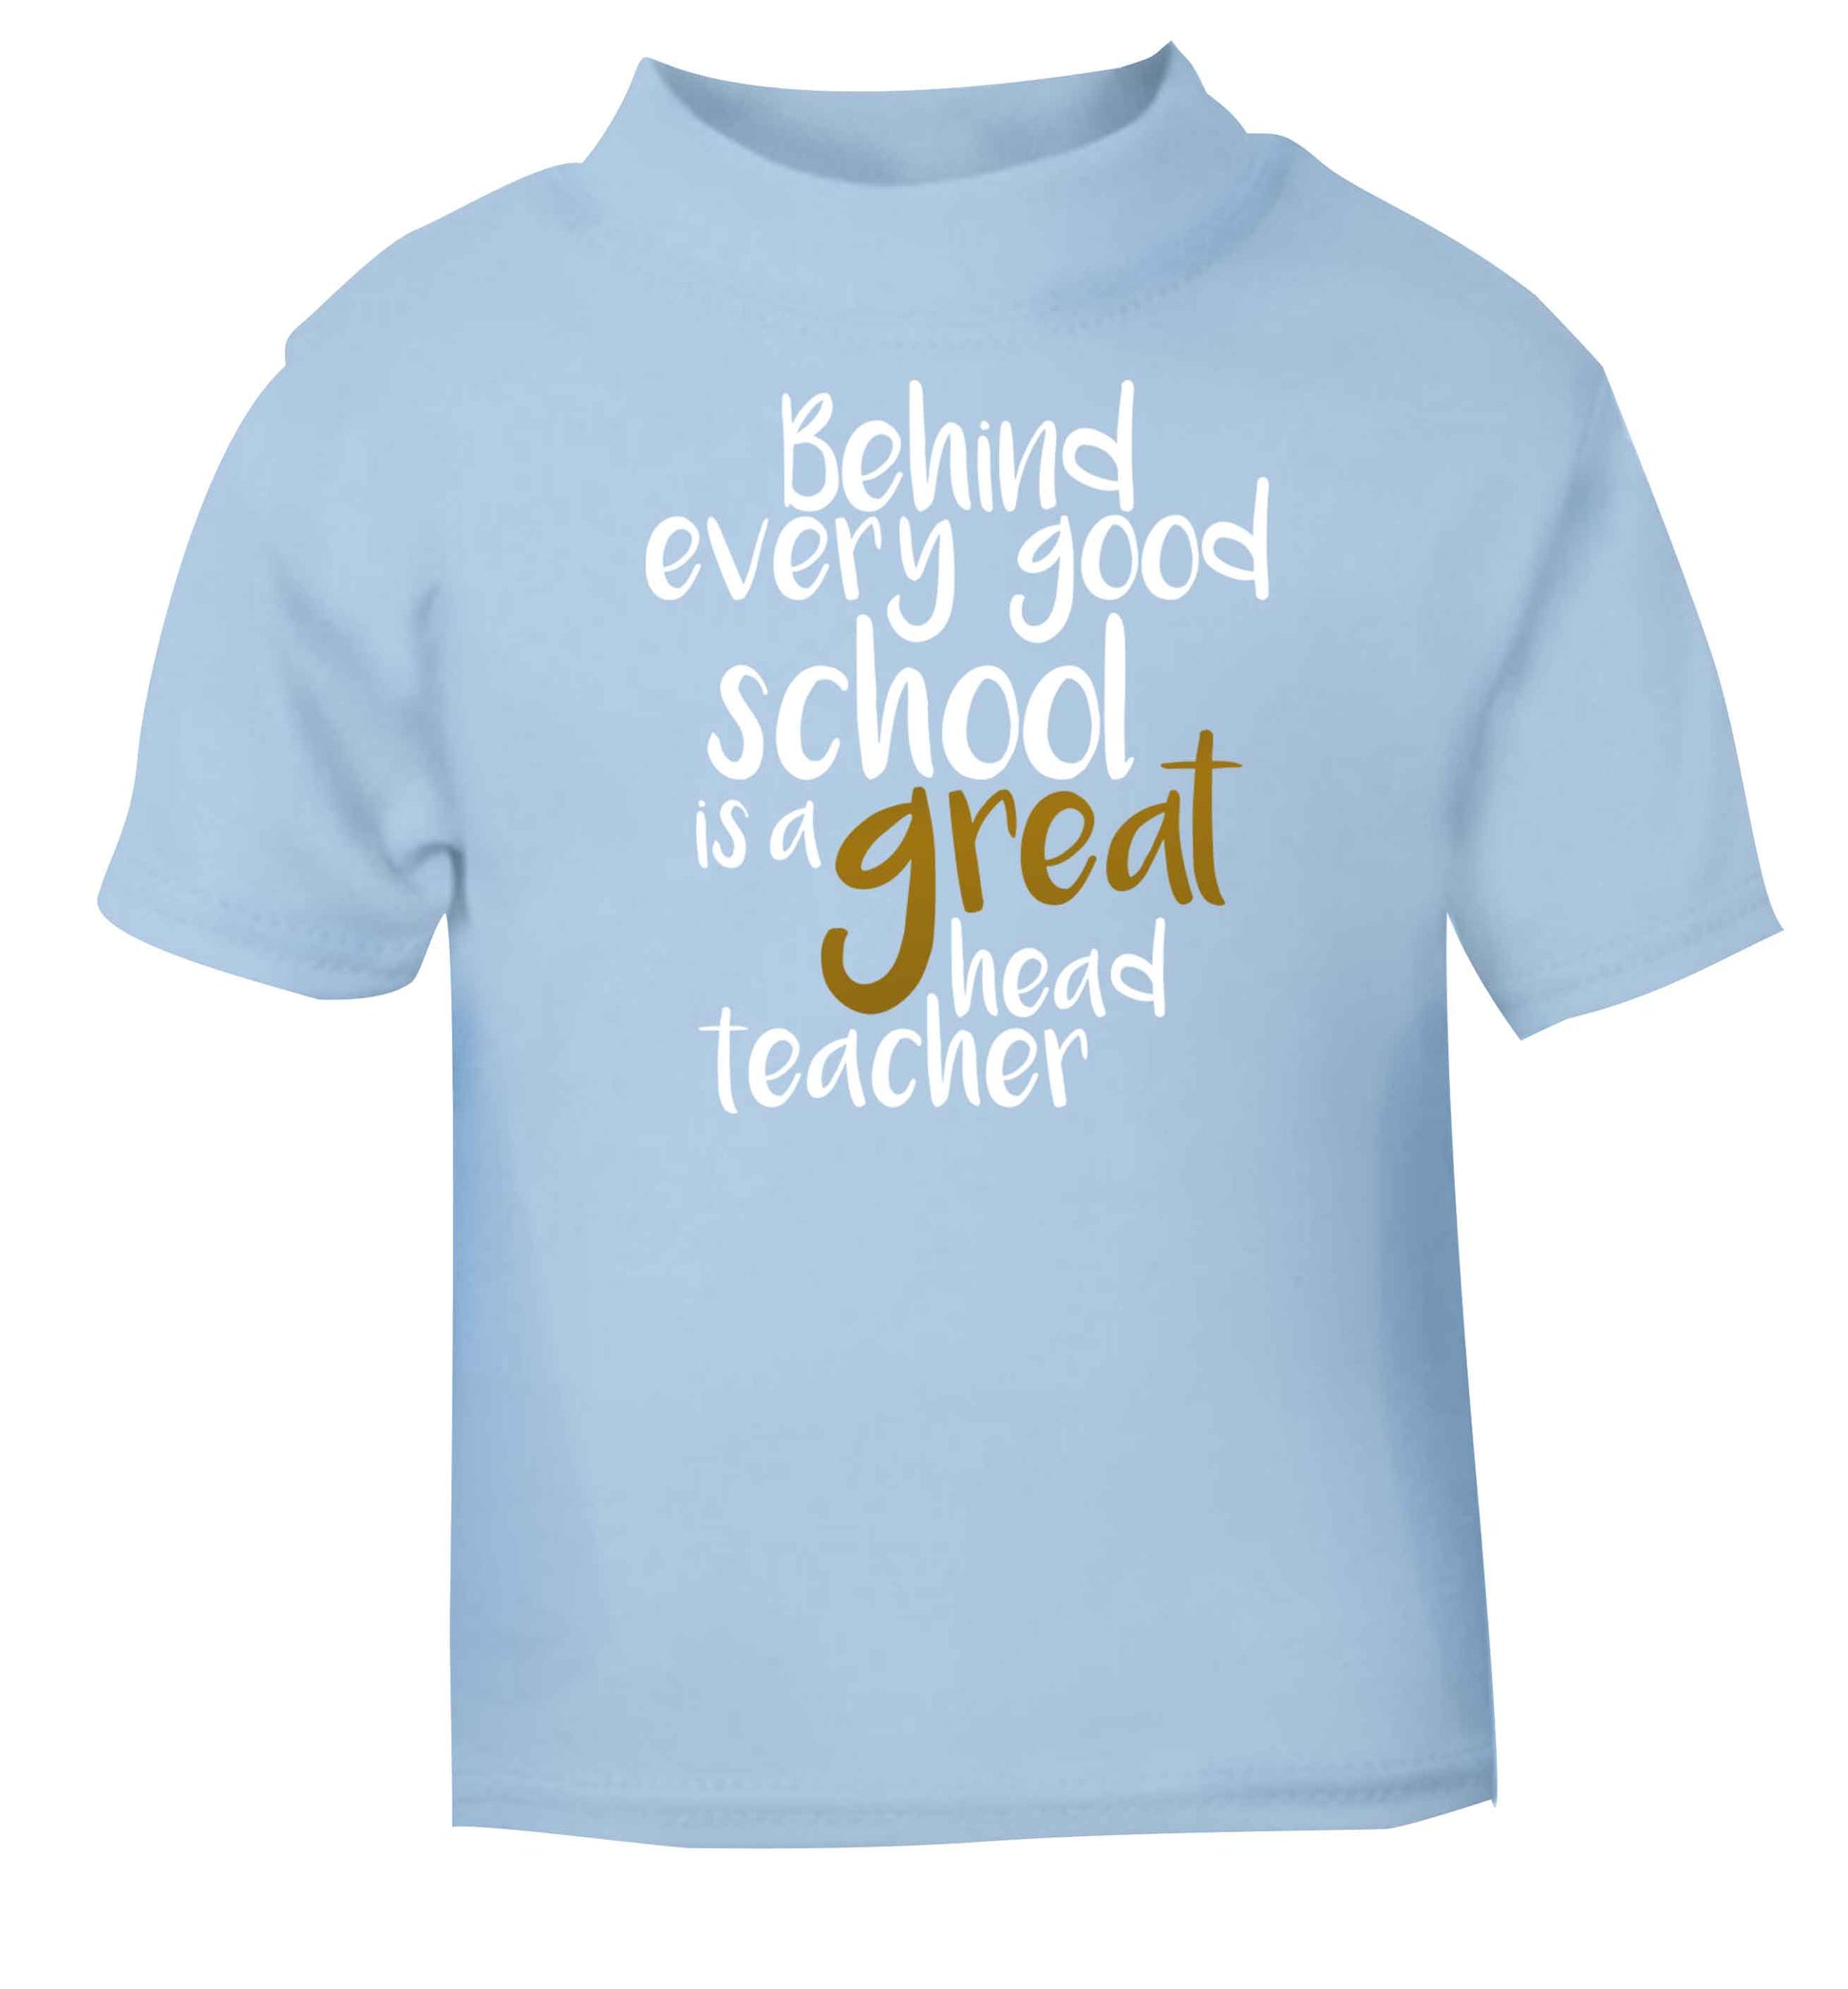 Behind every good school is a great head teacher light blue baby toddler Tshirt 2 Years